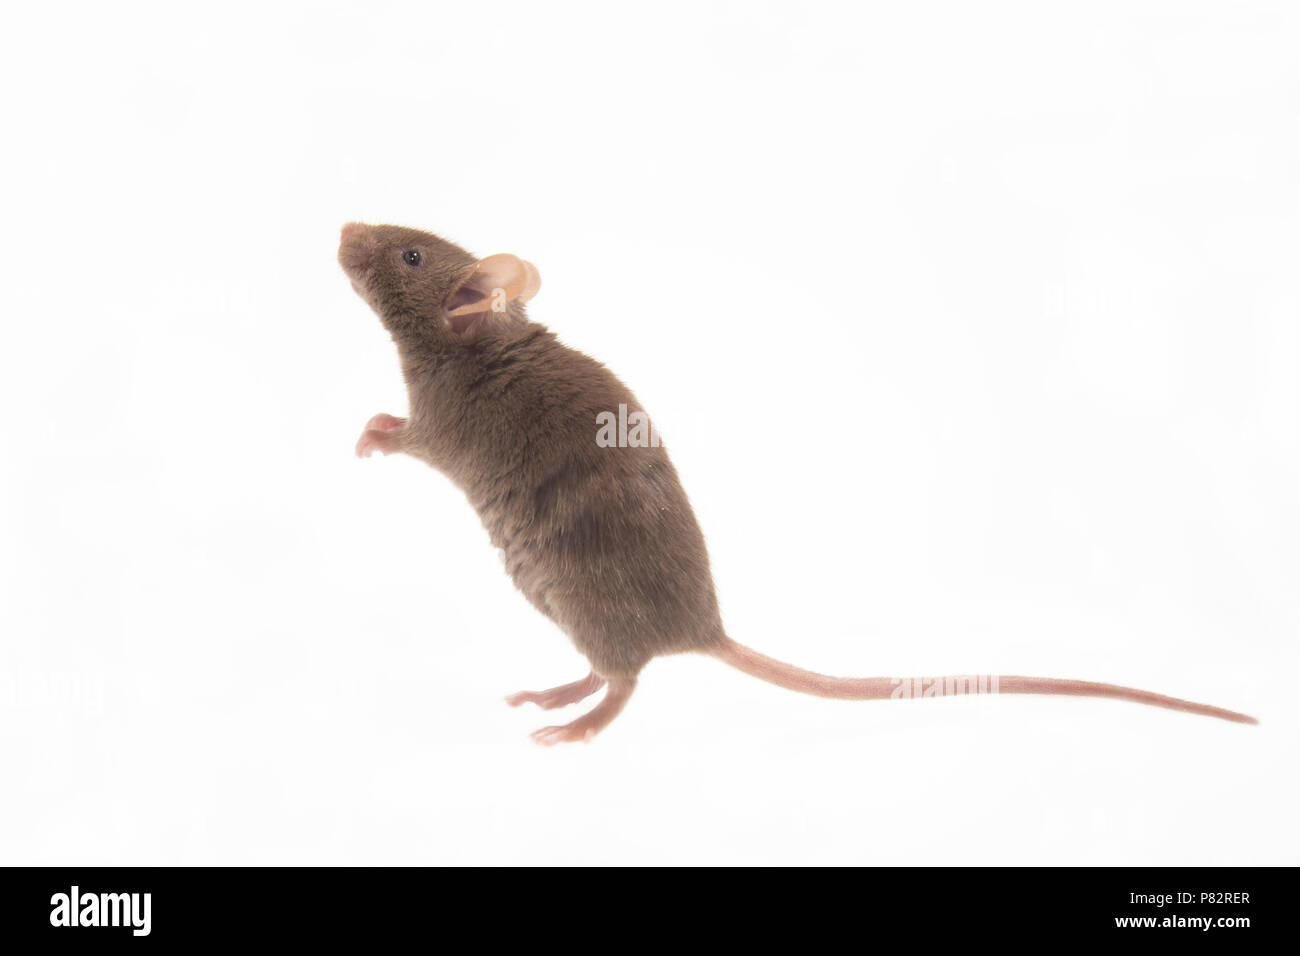 Huismuis, House Mouse Mus musculus Foto Stock